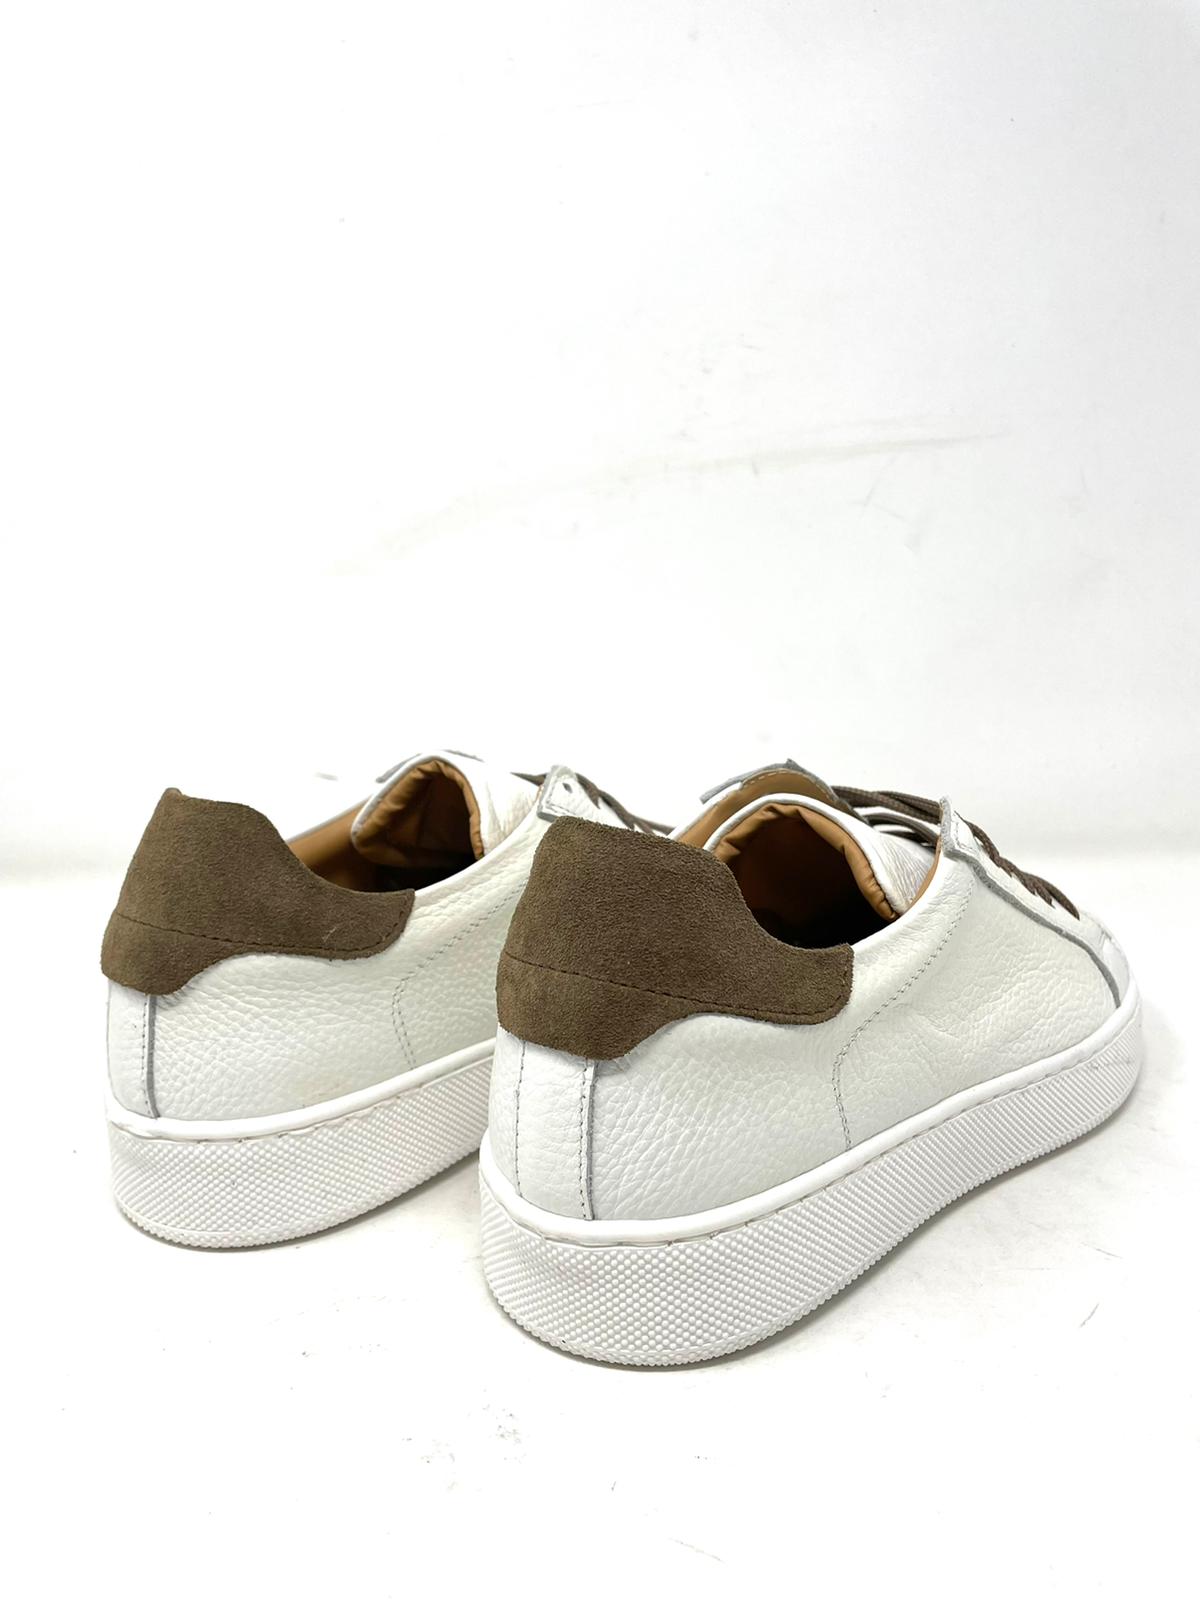 Genuine tumbled leather sneakers